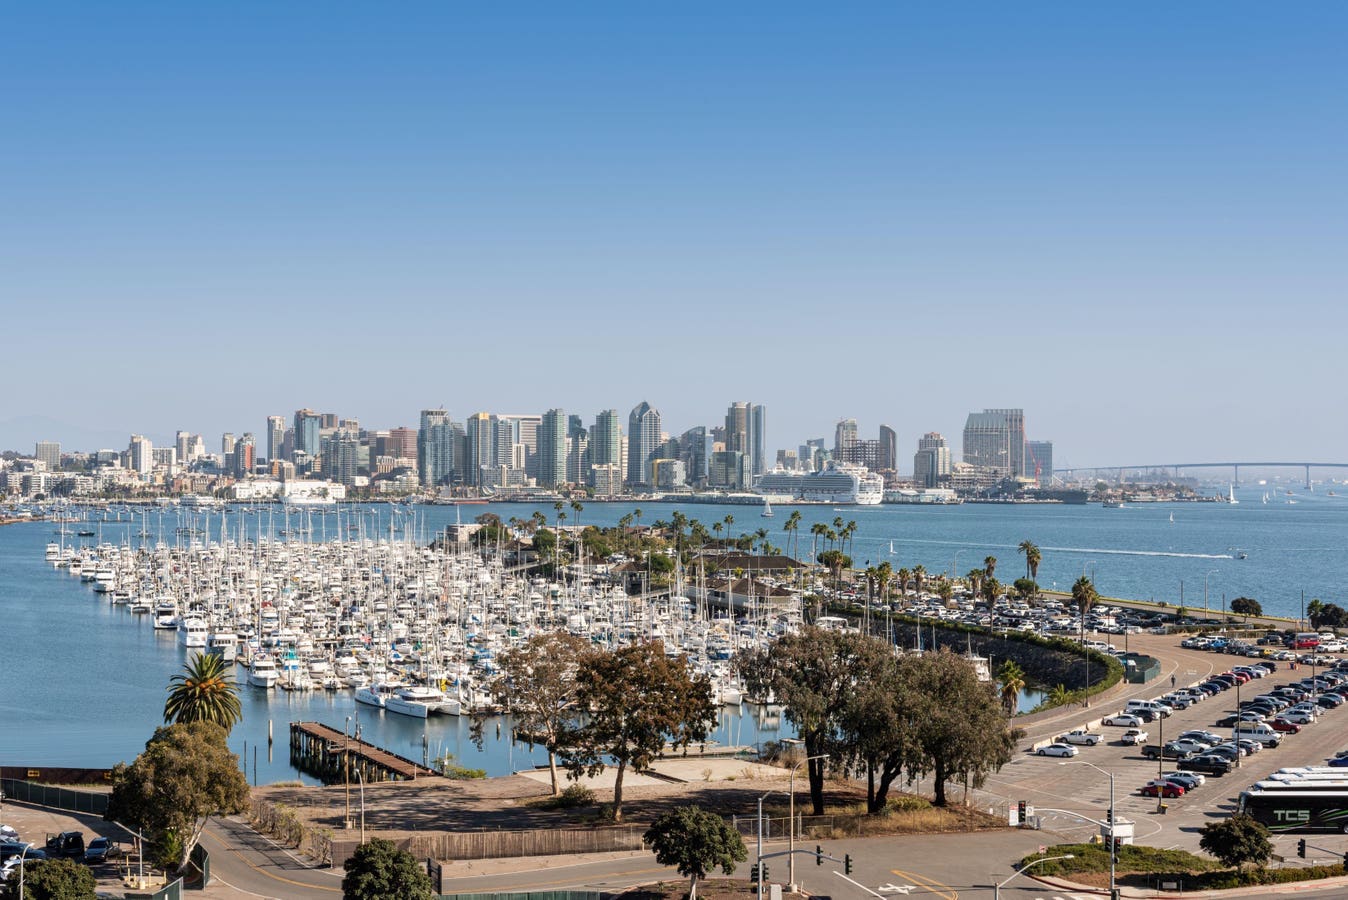 Sheraton San Diego Offers Bayside View Of ‘America’s Finest City’